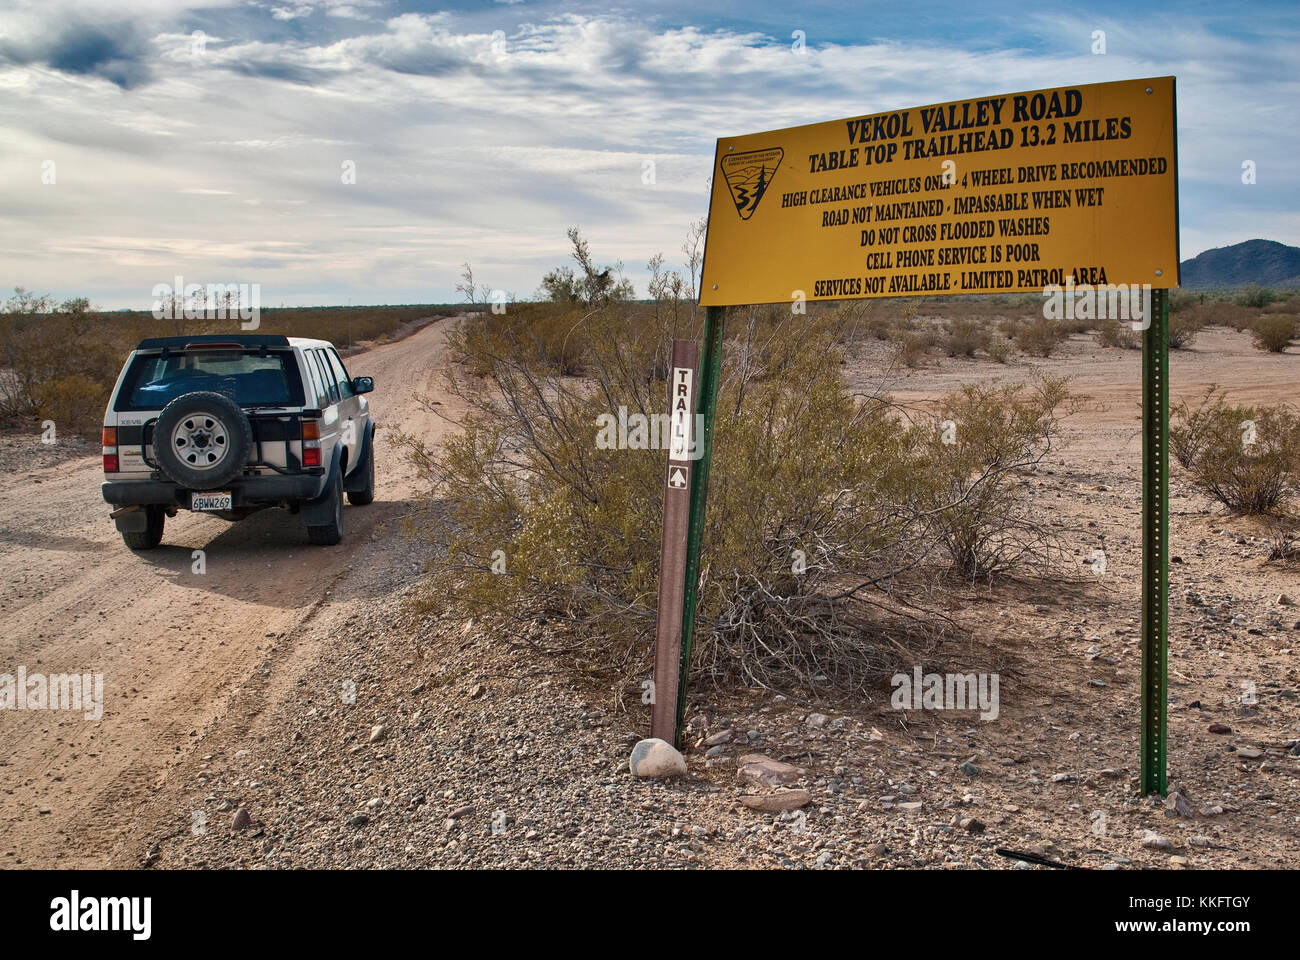 Old Nissan Pathfinder at warning sign at Vekol Valley Road in Sonoran Desert National Monument, Arizona, USA Stock Photo